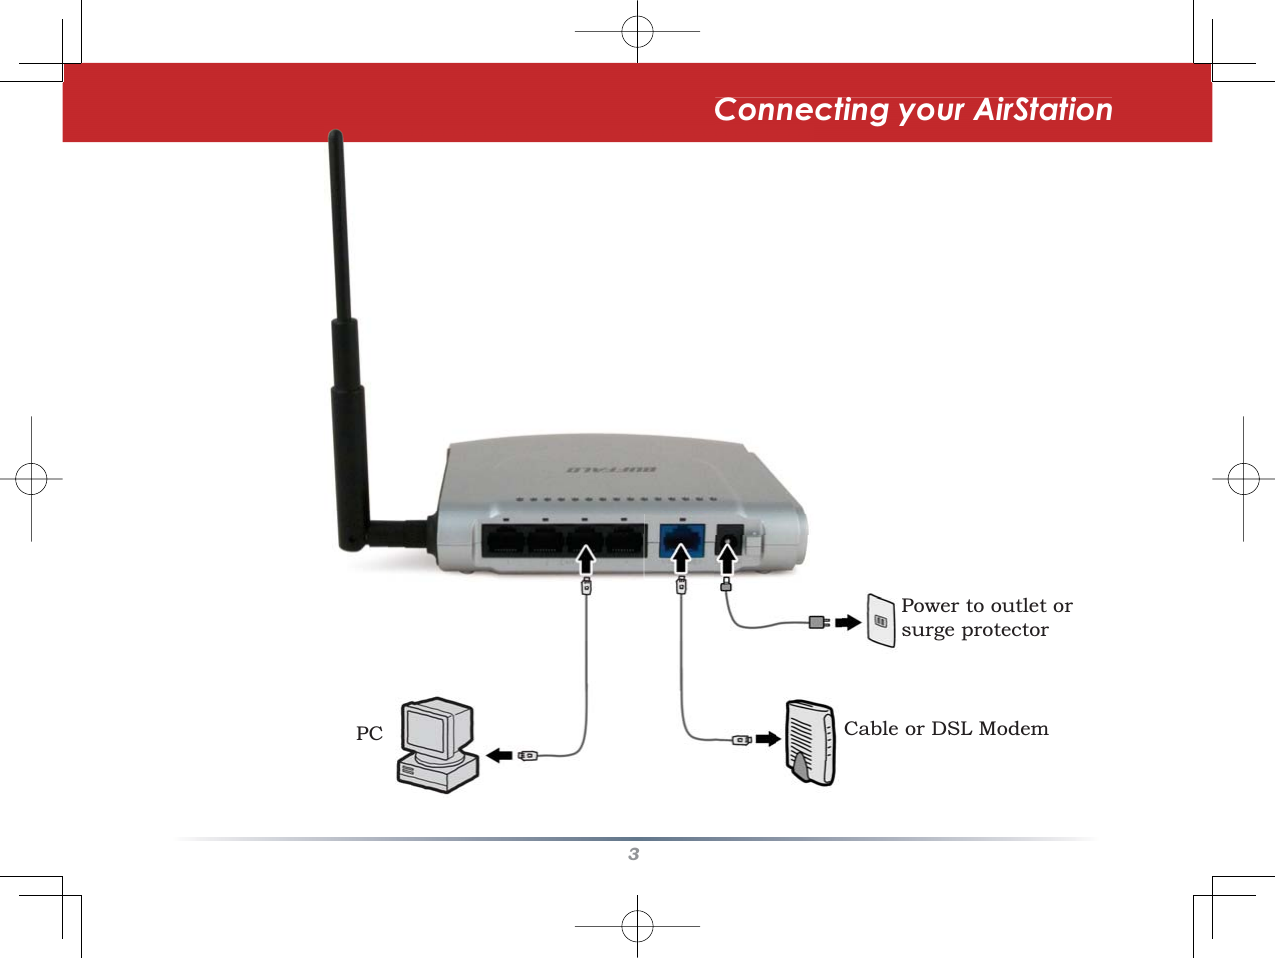 3Connecting your AirStationPC Cable or DSL ModemPower to outlet or surge protector